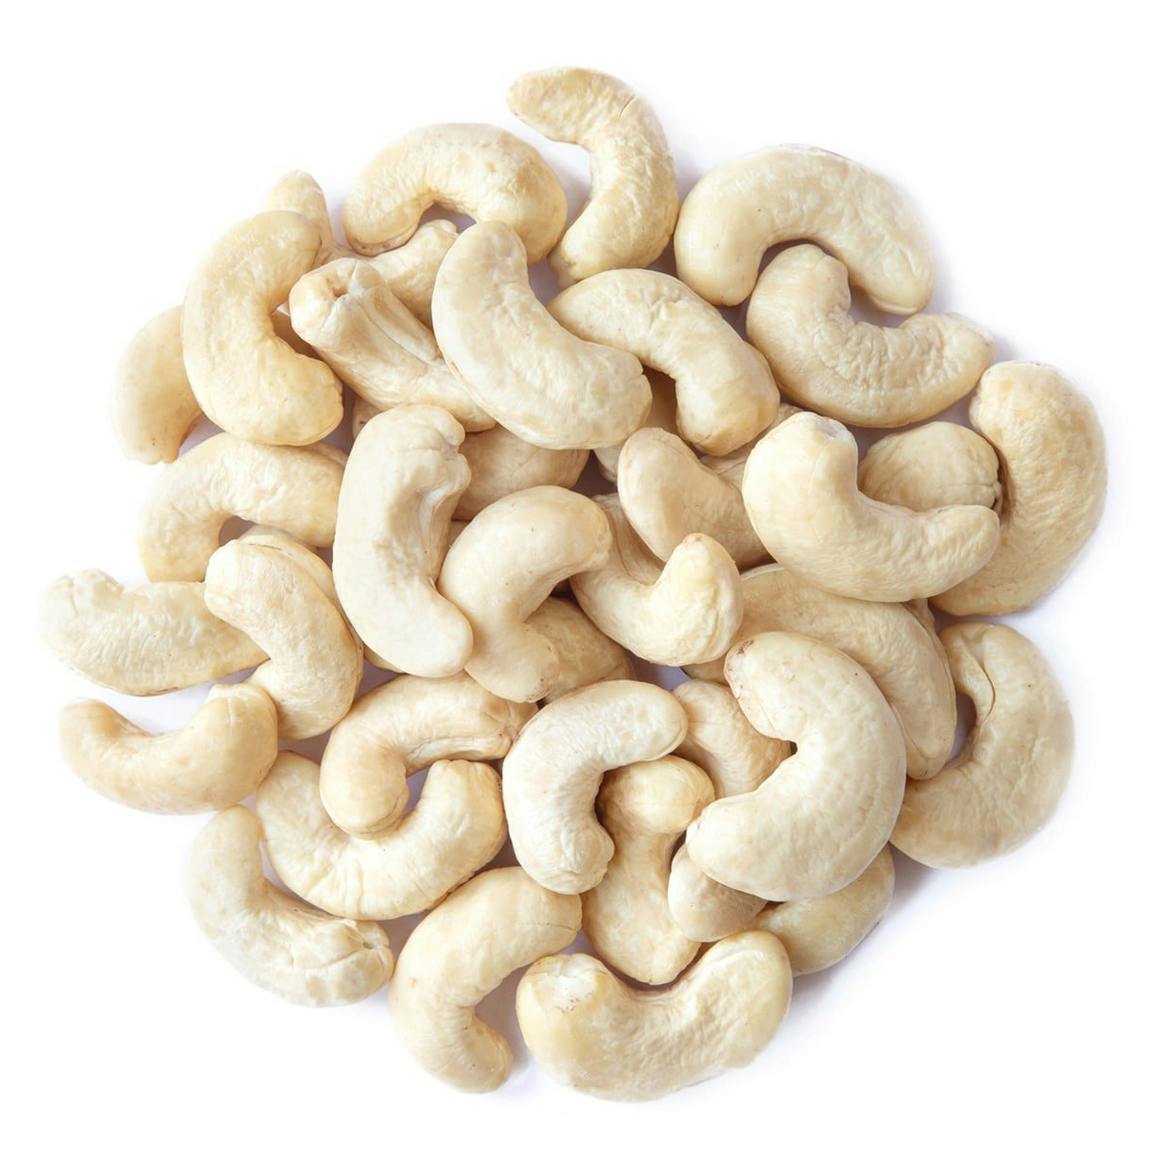 cashews (soaked for 30 min, then drained)